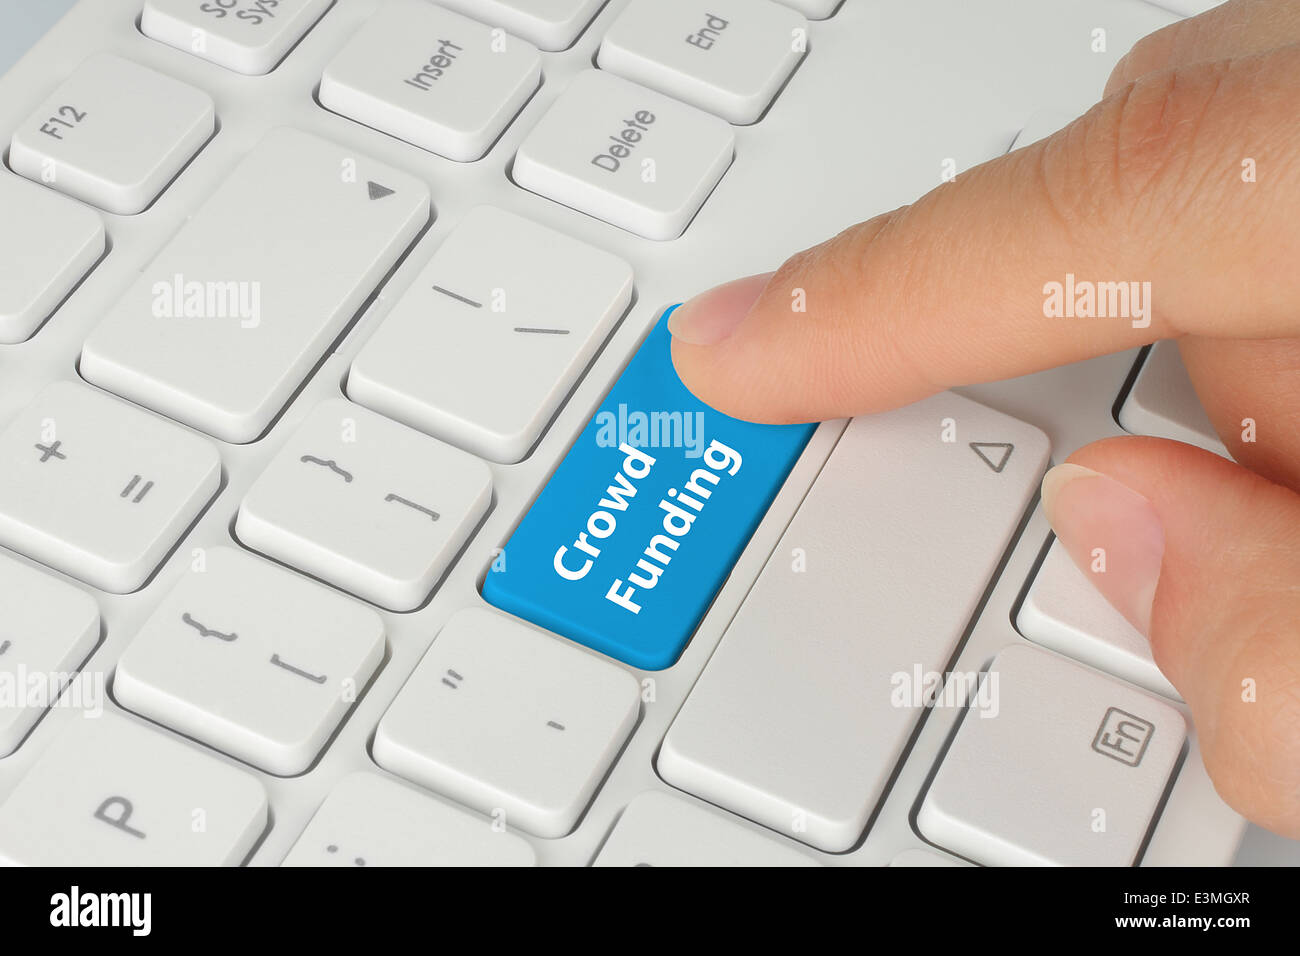 Hand pushing blue crowd funding button on keyboard Stock Photo